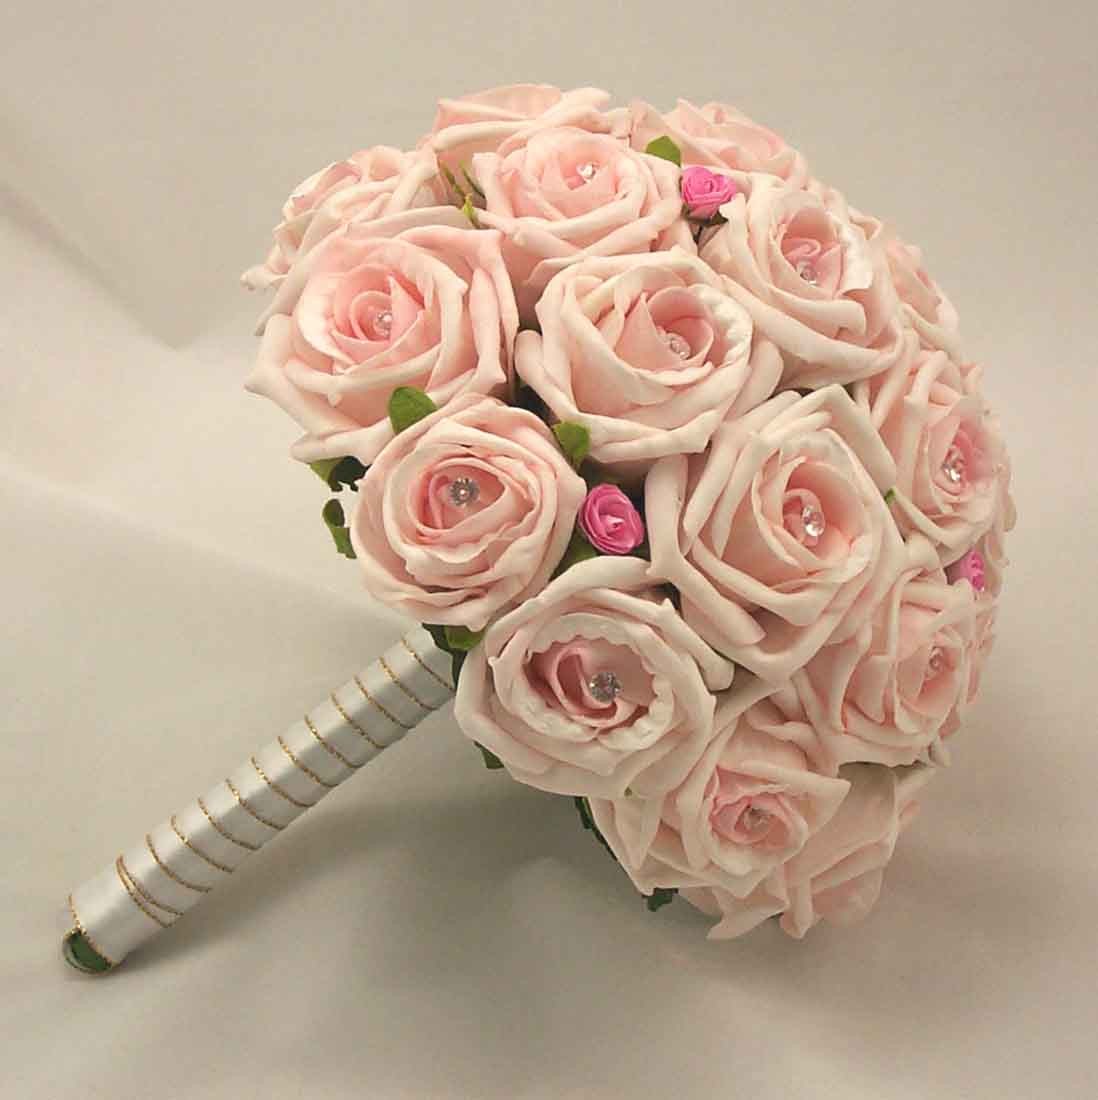 Diamante & Ribbon Posy Handtied Bouquet Wedding Flowers 7 inches Rose 